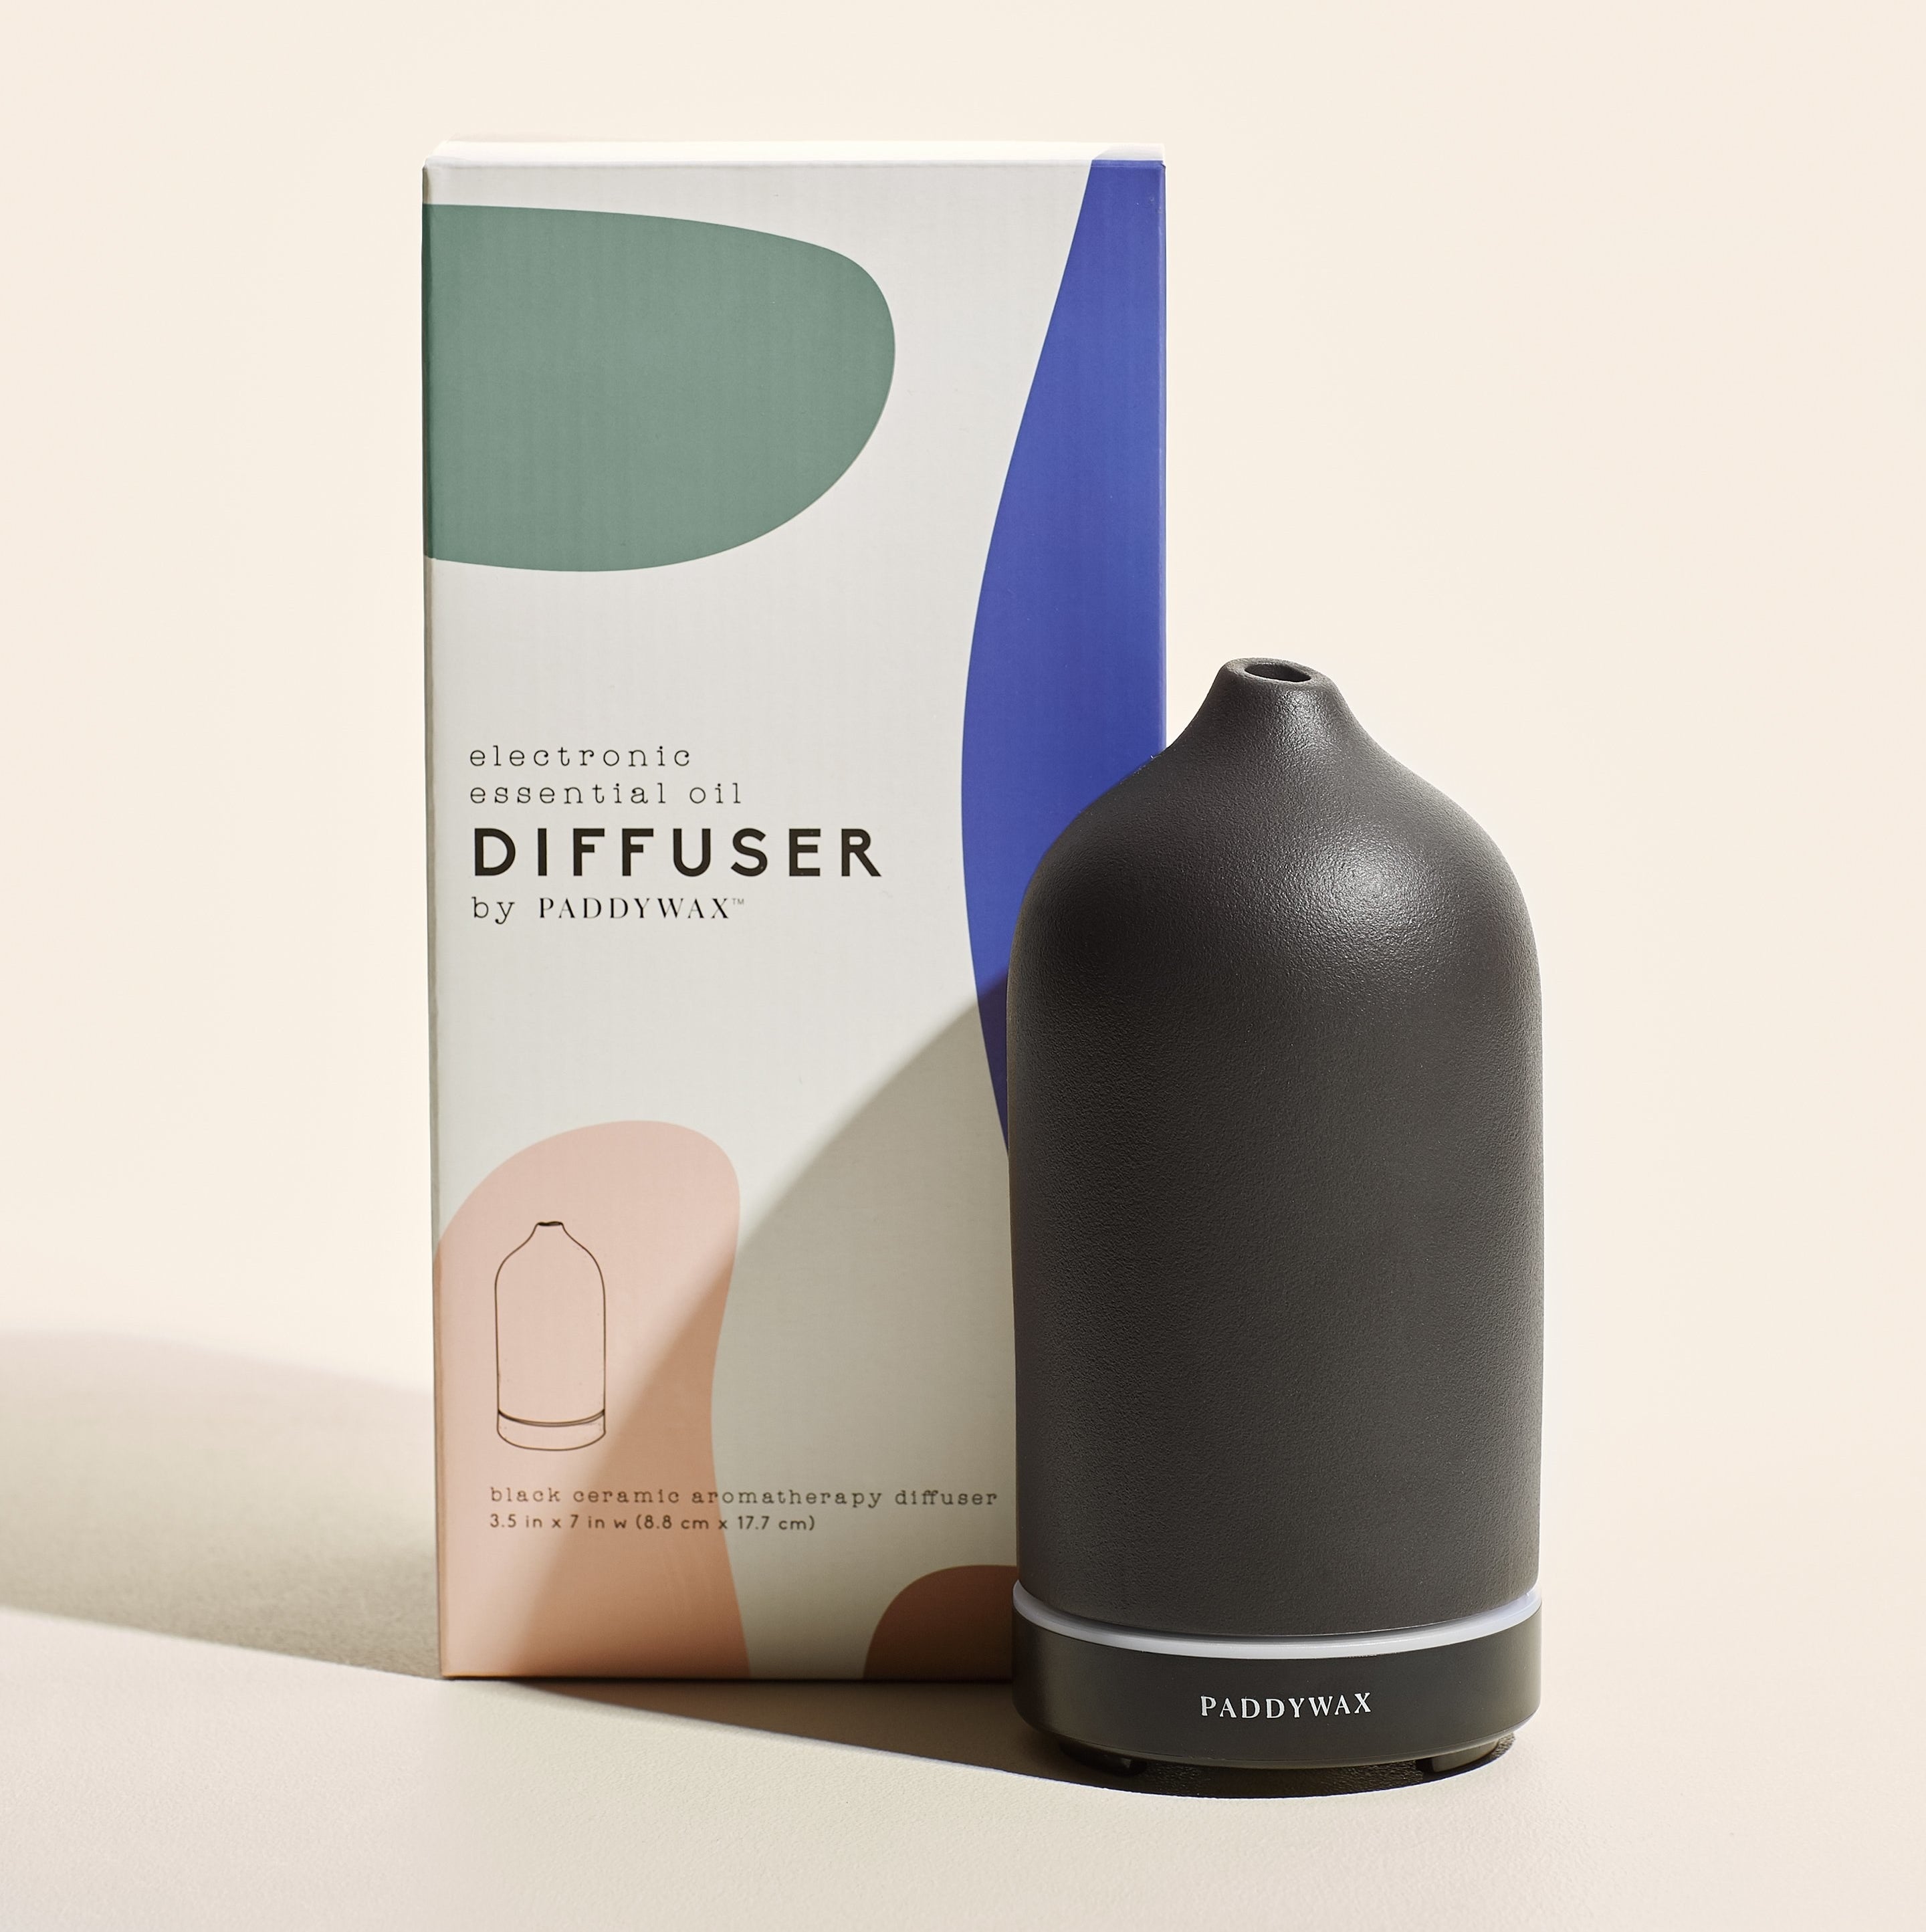 The black essential oil diffuser posed in front of its packaging